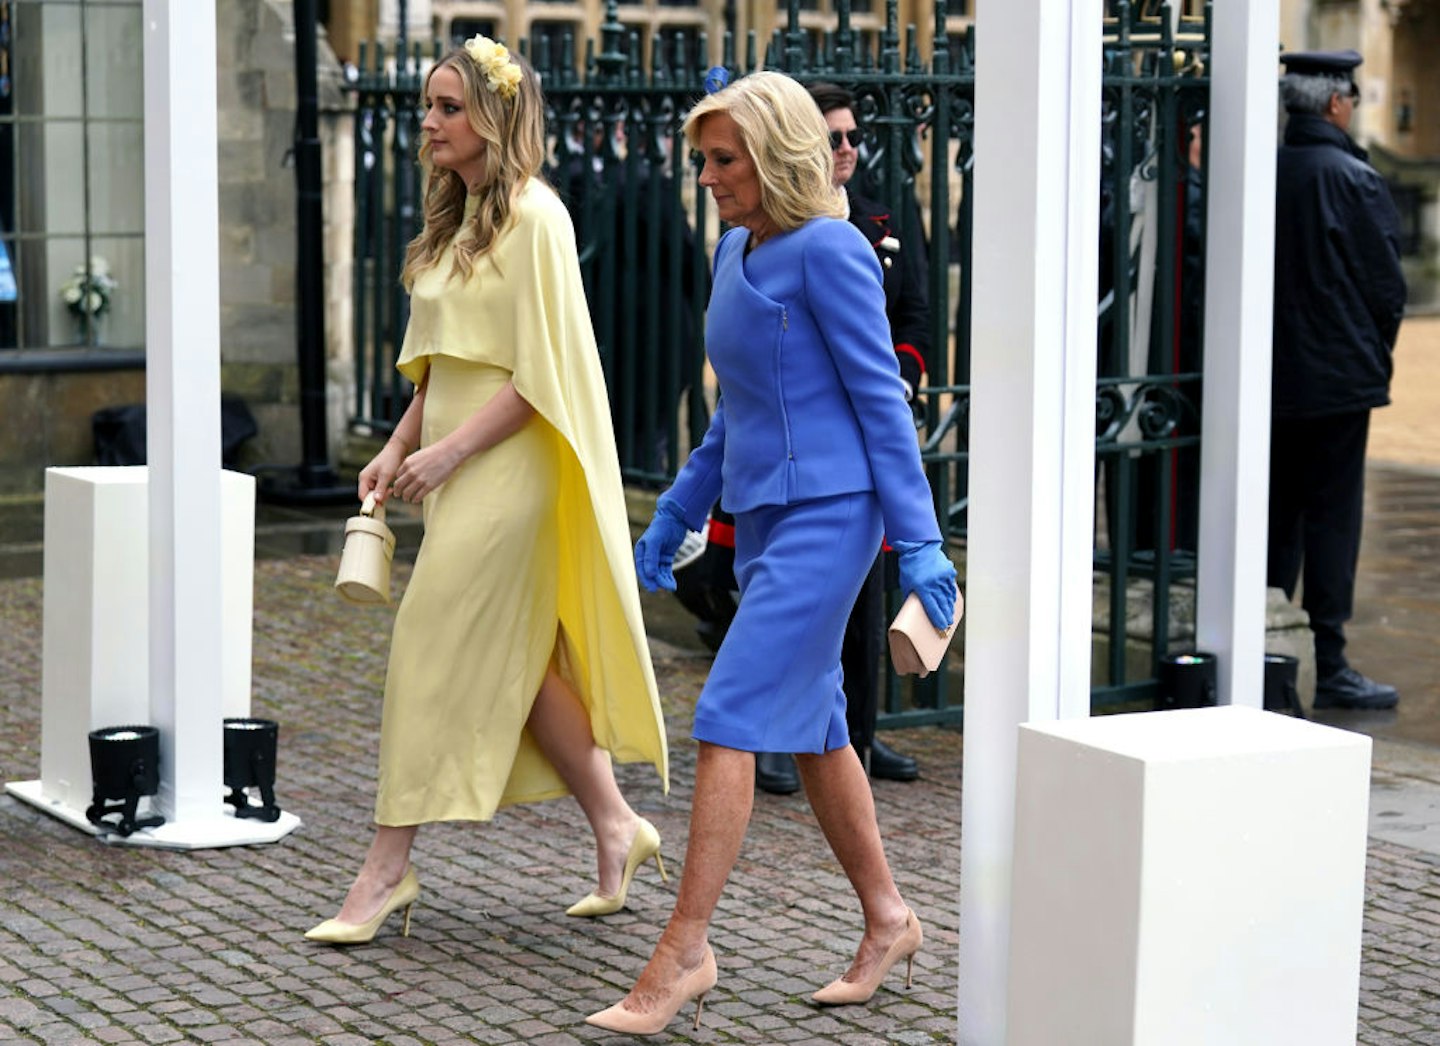 first lady Jill Biden and her granddaughter Finnegan Biden arrive at Westminster Abbey ahead of the Coronation 